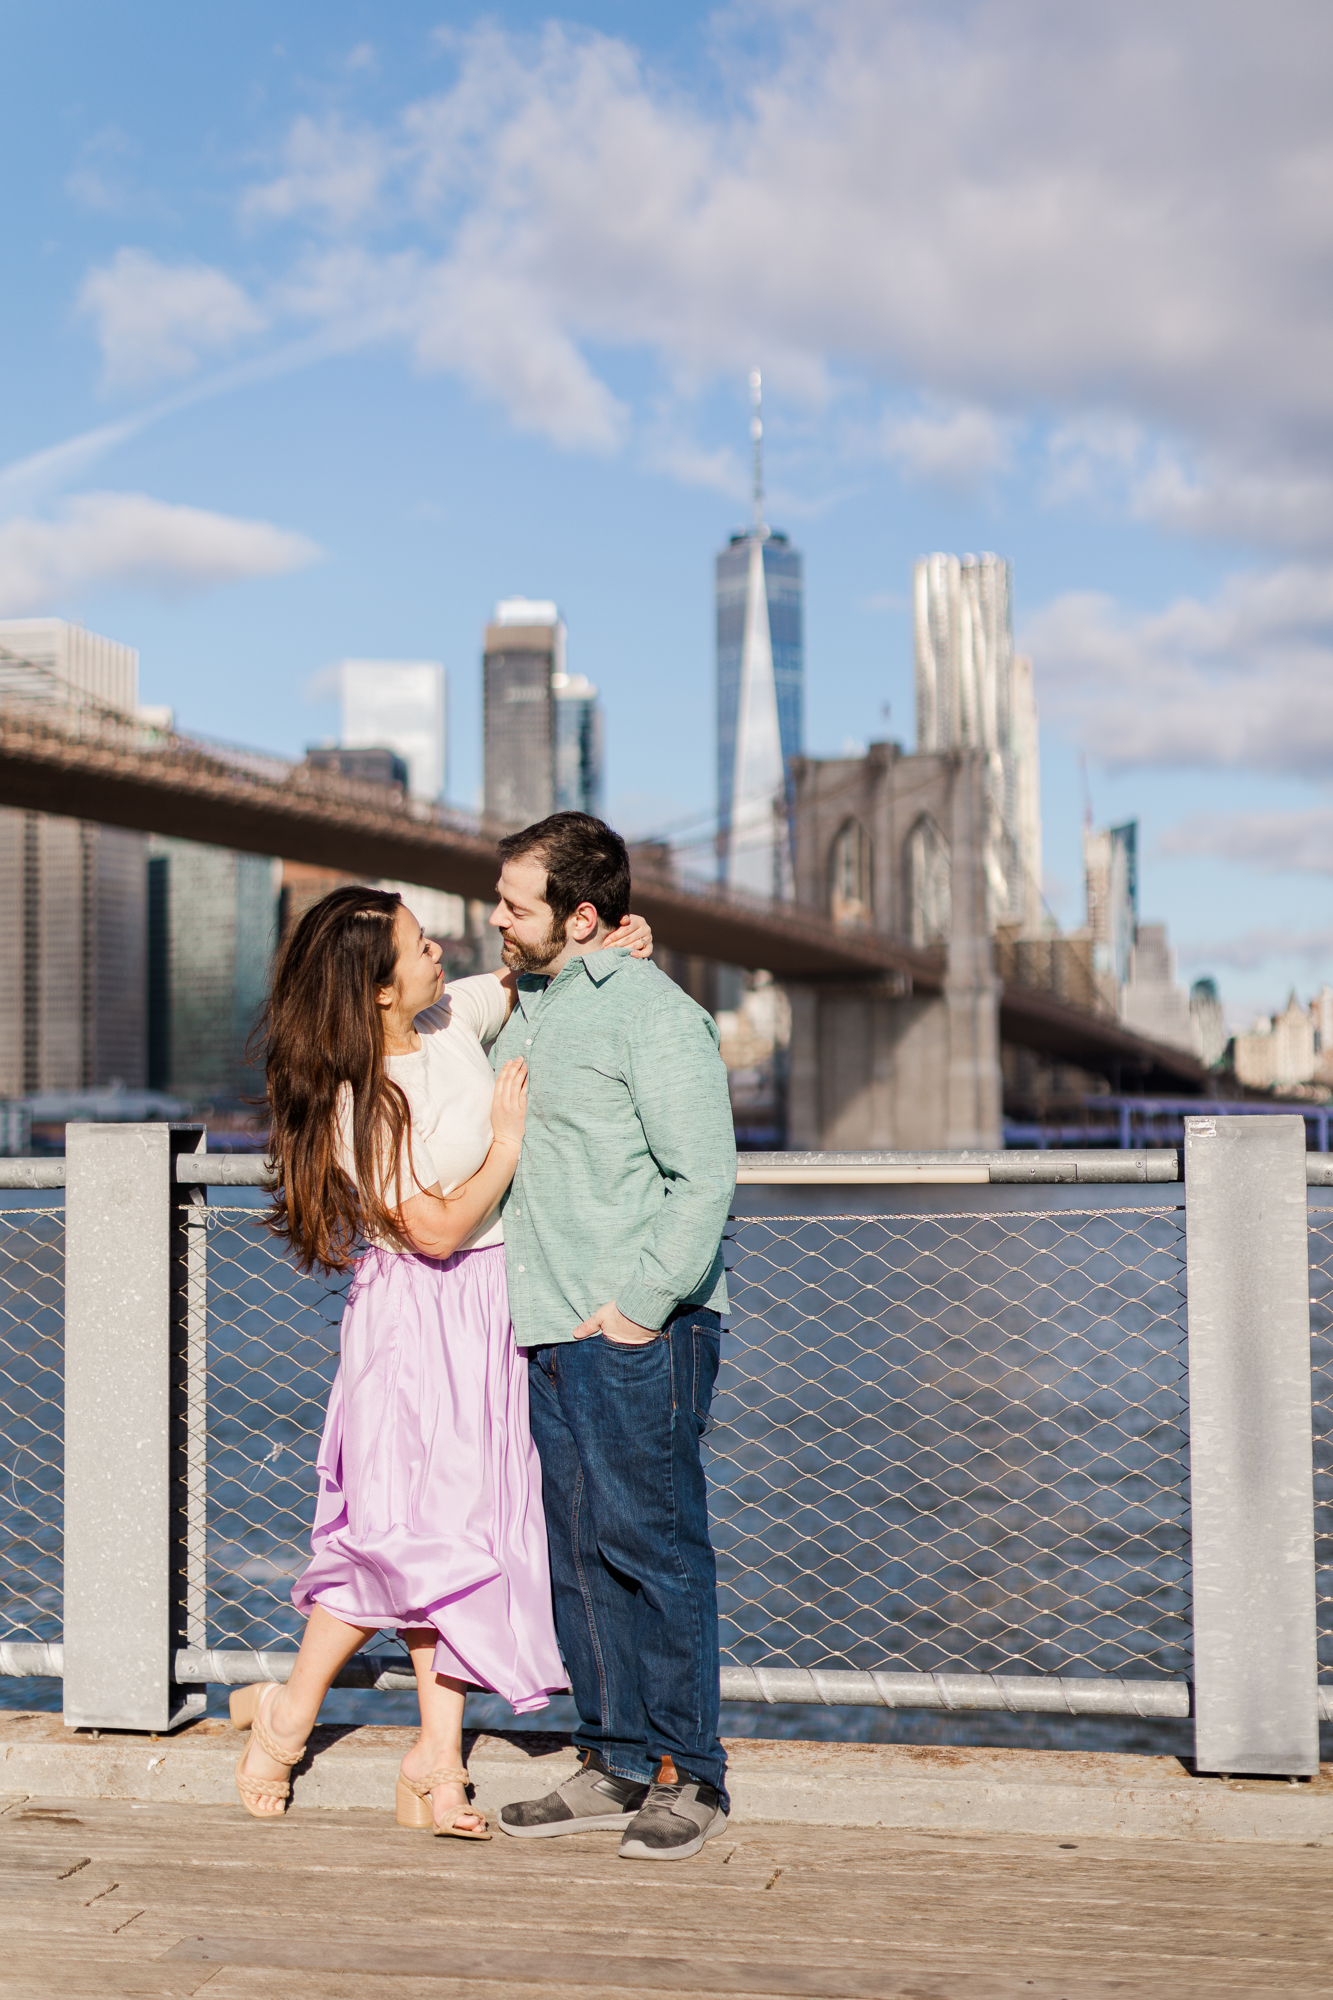 Scenic Brooklyn Bridge Engagement Photography with Matching Outfits